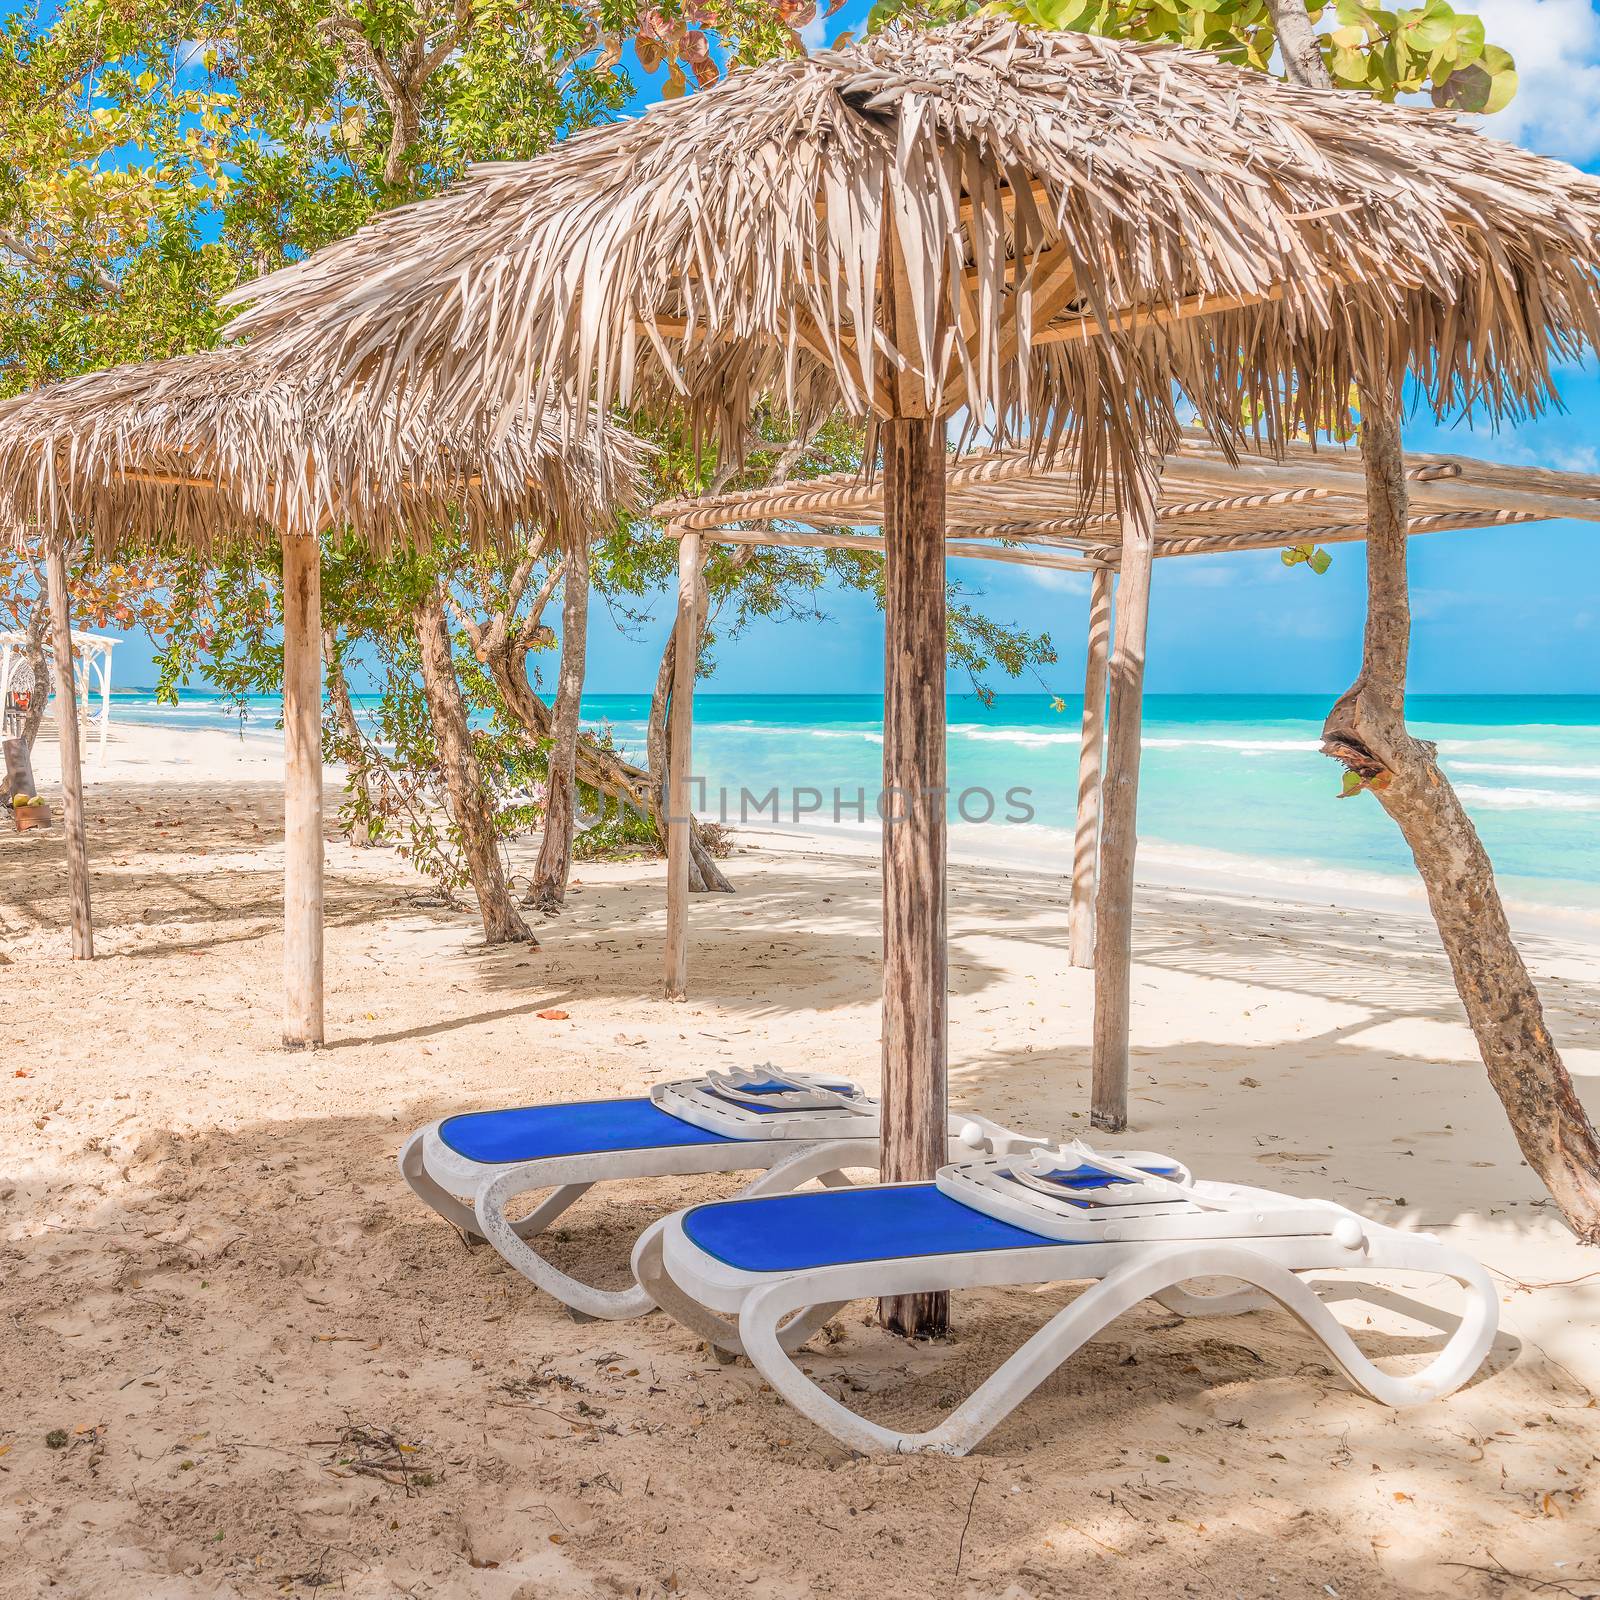 Two chairs await under a cabana at a quiet beach on the caribbean.